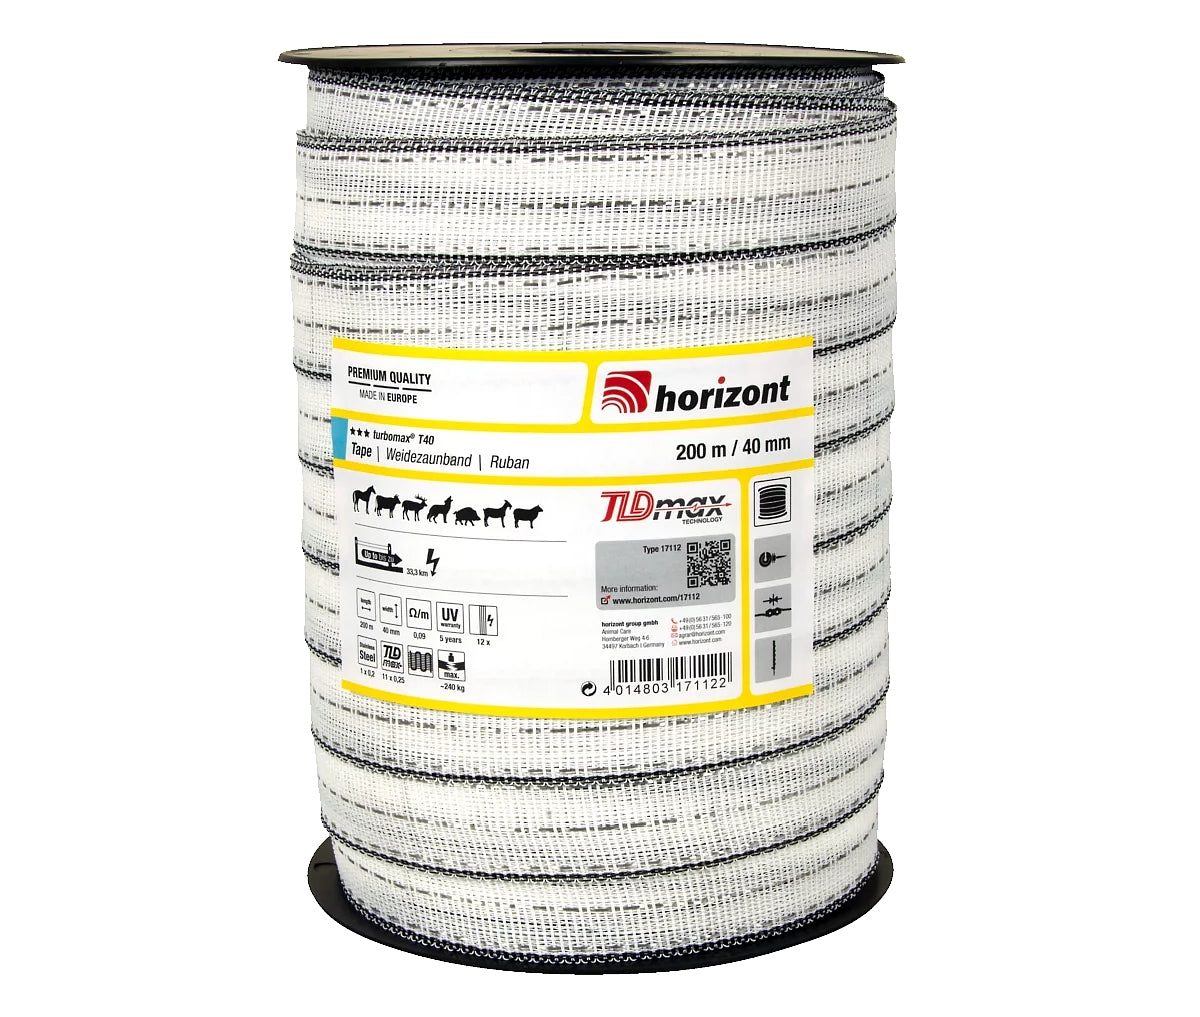 Horizont - Turbomax T40 - Pasture Electric Fence Tape - 40mm x 200m